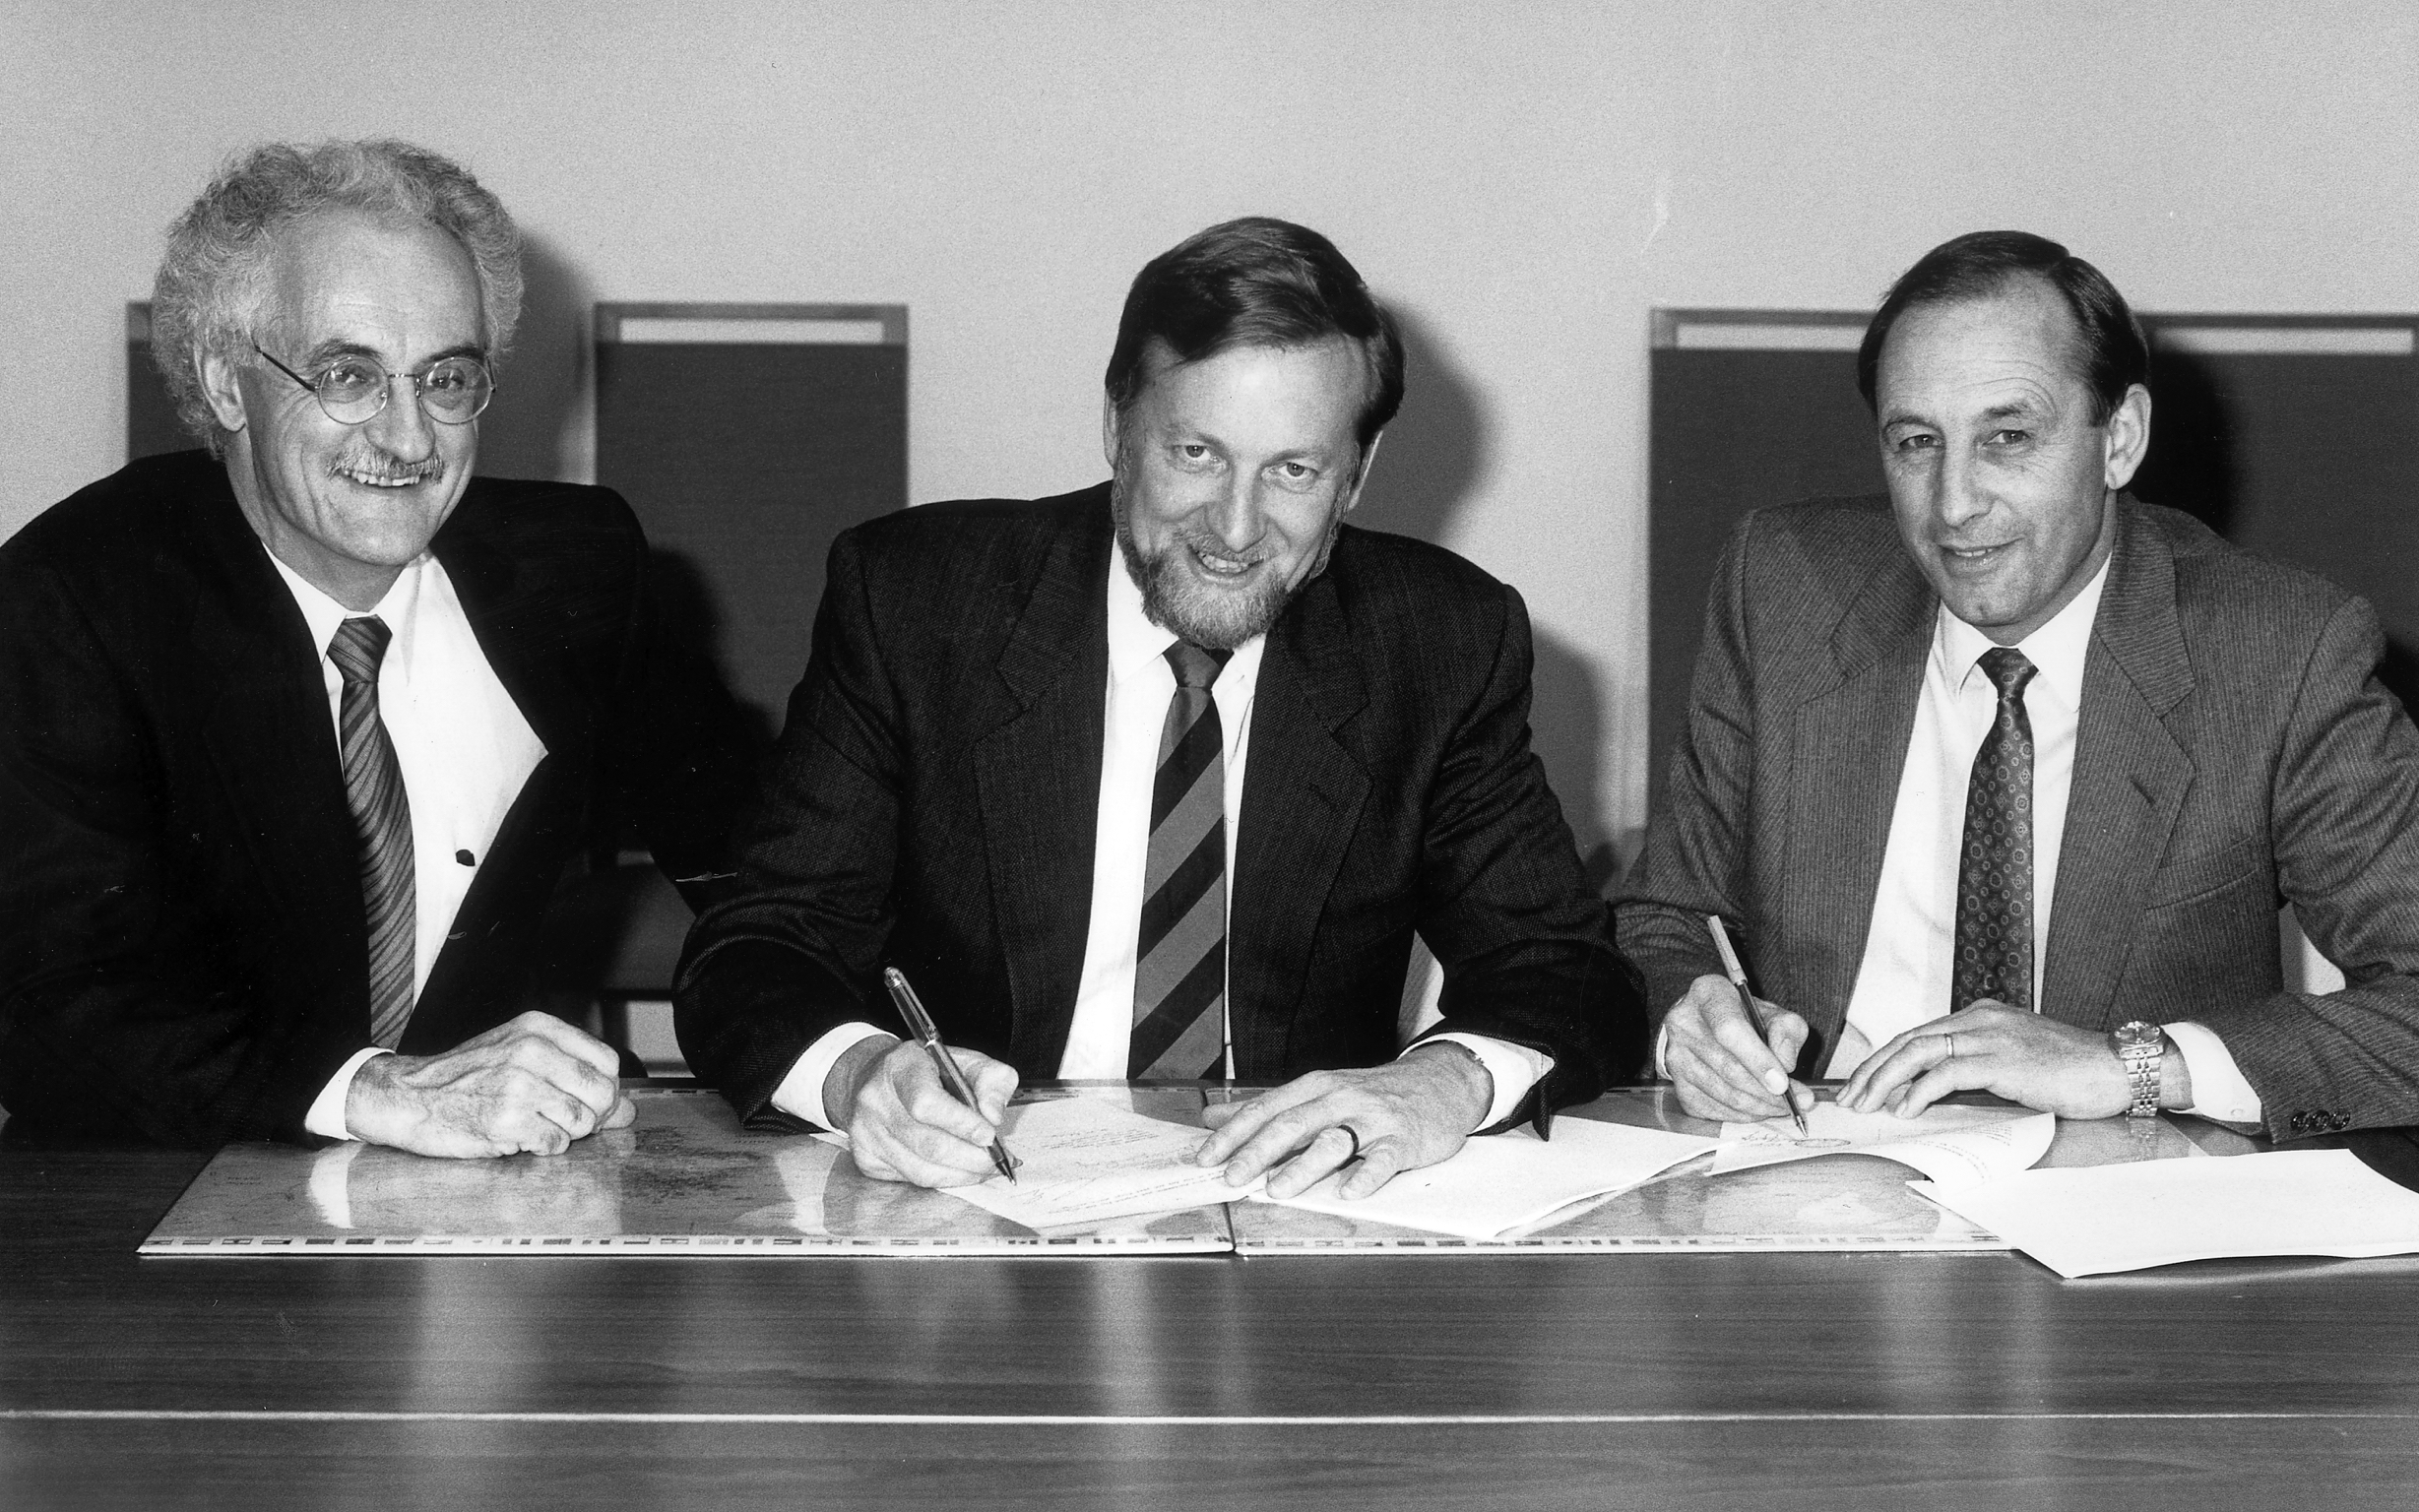 Bill Armstrong (right) signing a volunteer program agreement with Foreign Minister Garath Evans (centre) and Christopher Fogarty, former Chair of OSB/AVI.